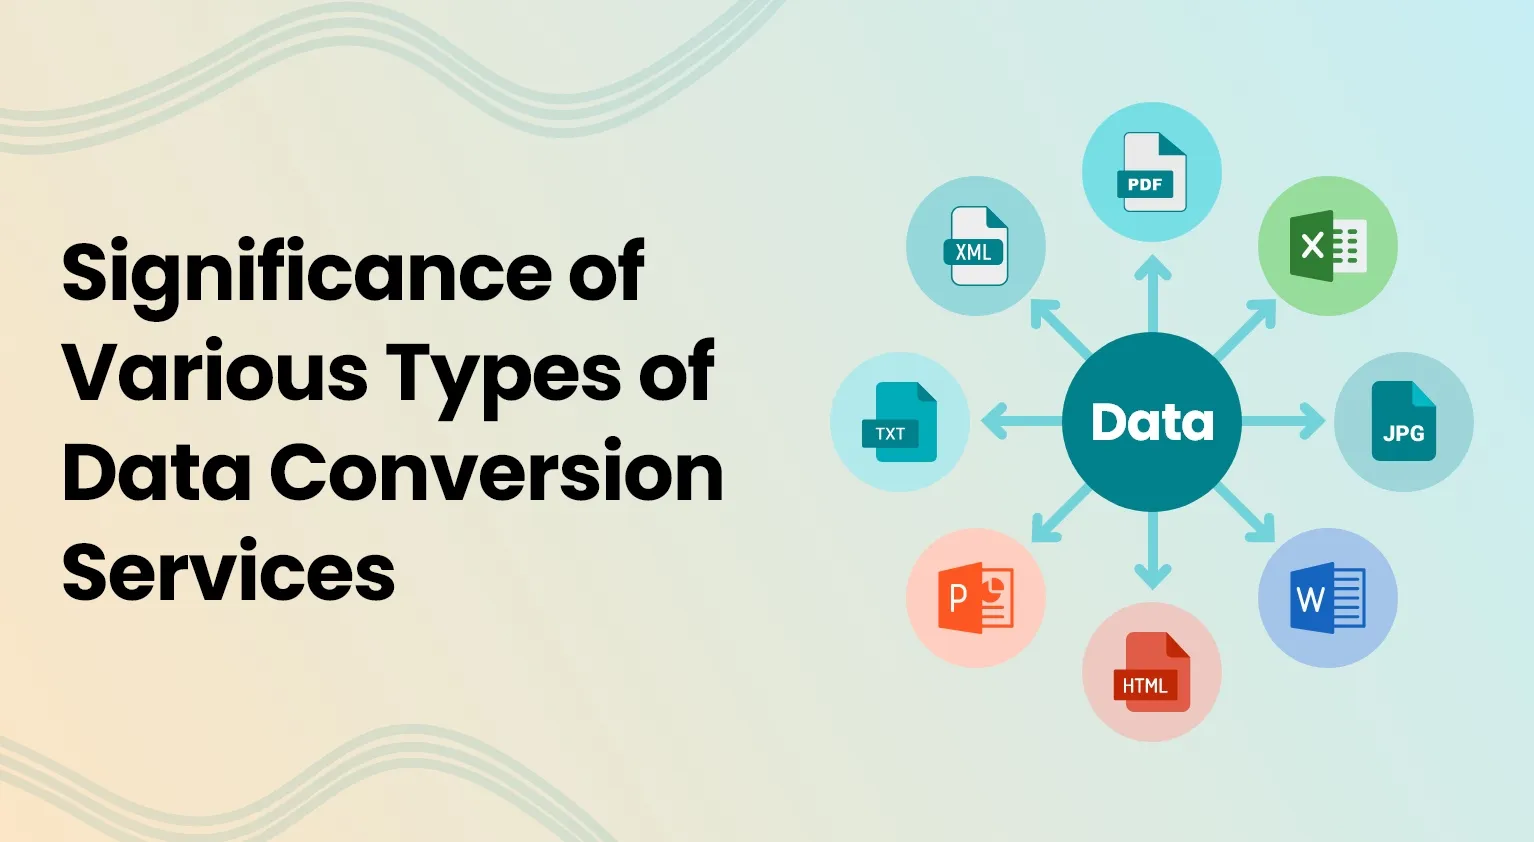 Significance of Various Types of Data Conversion Services